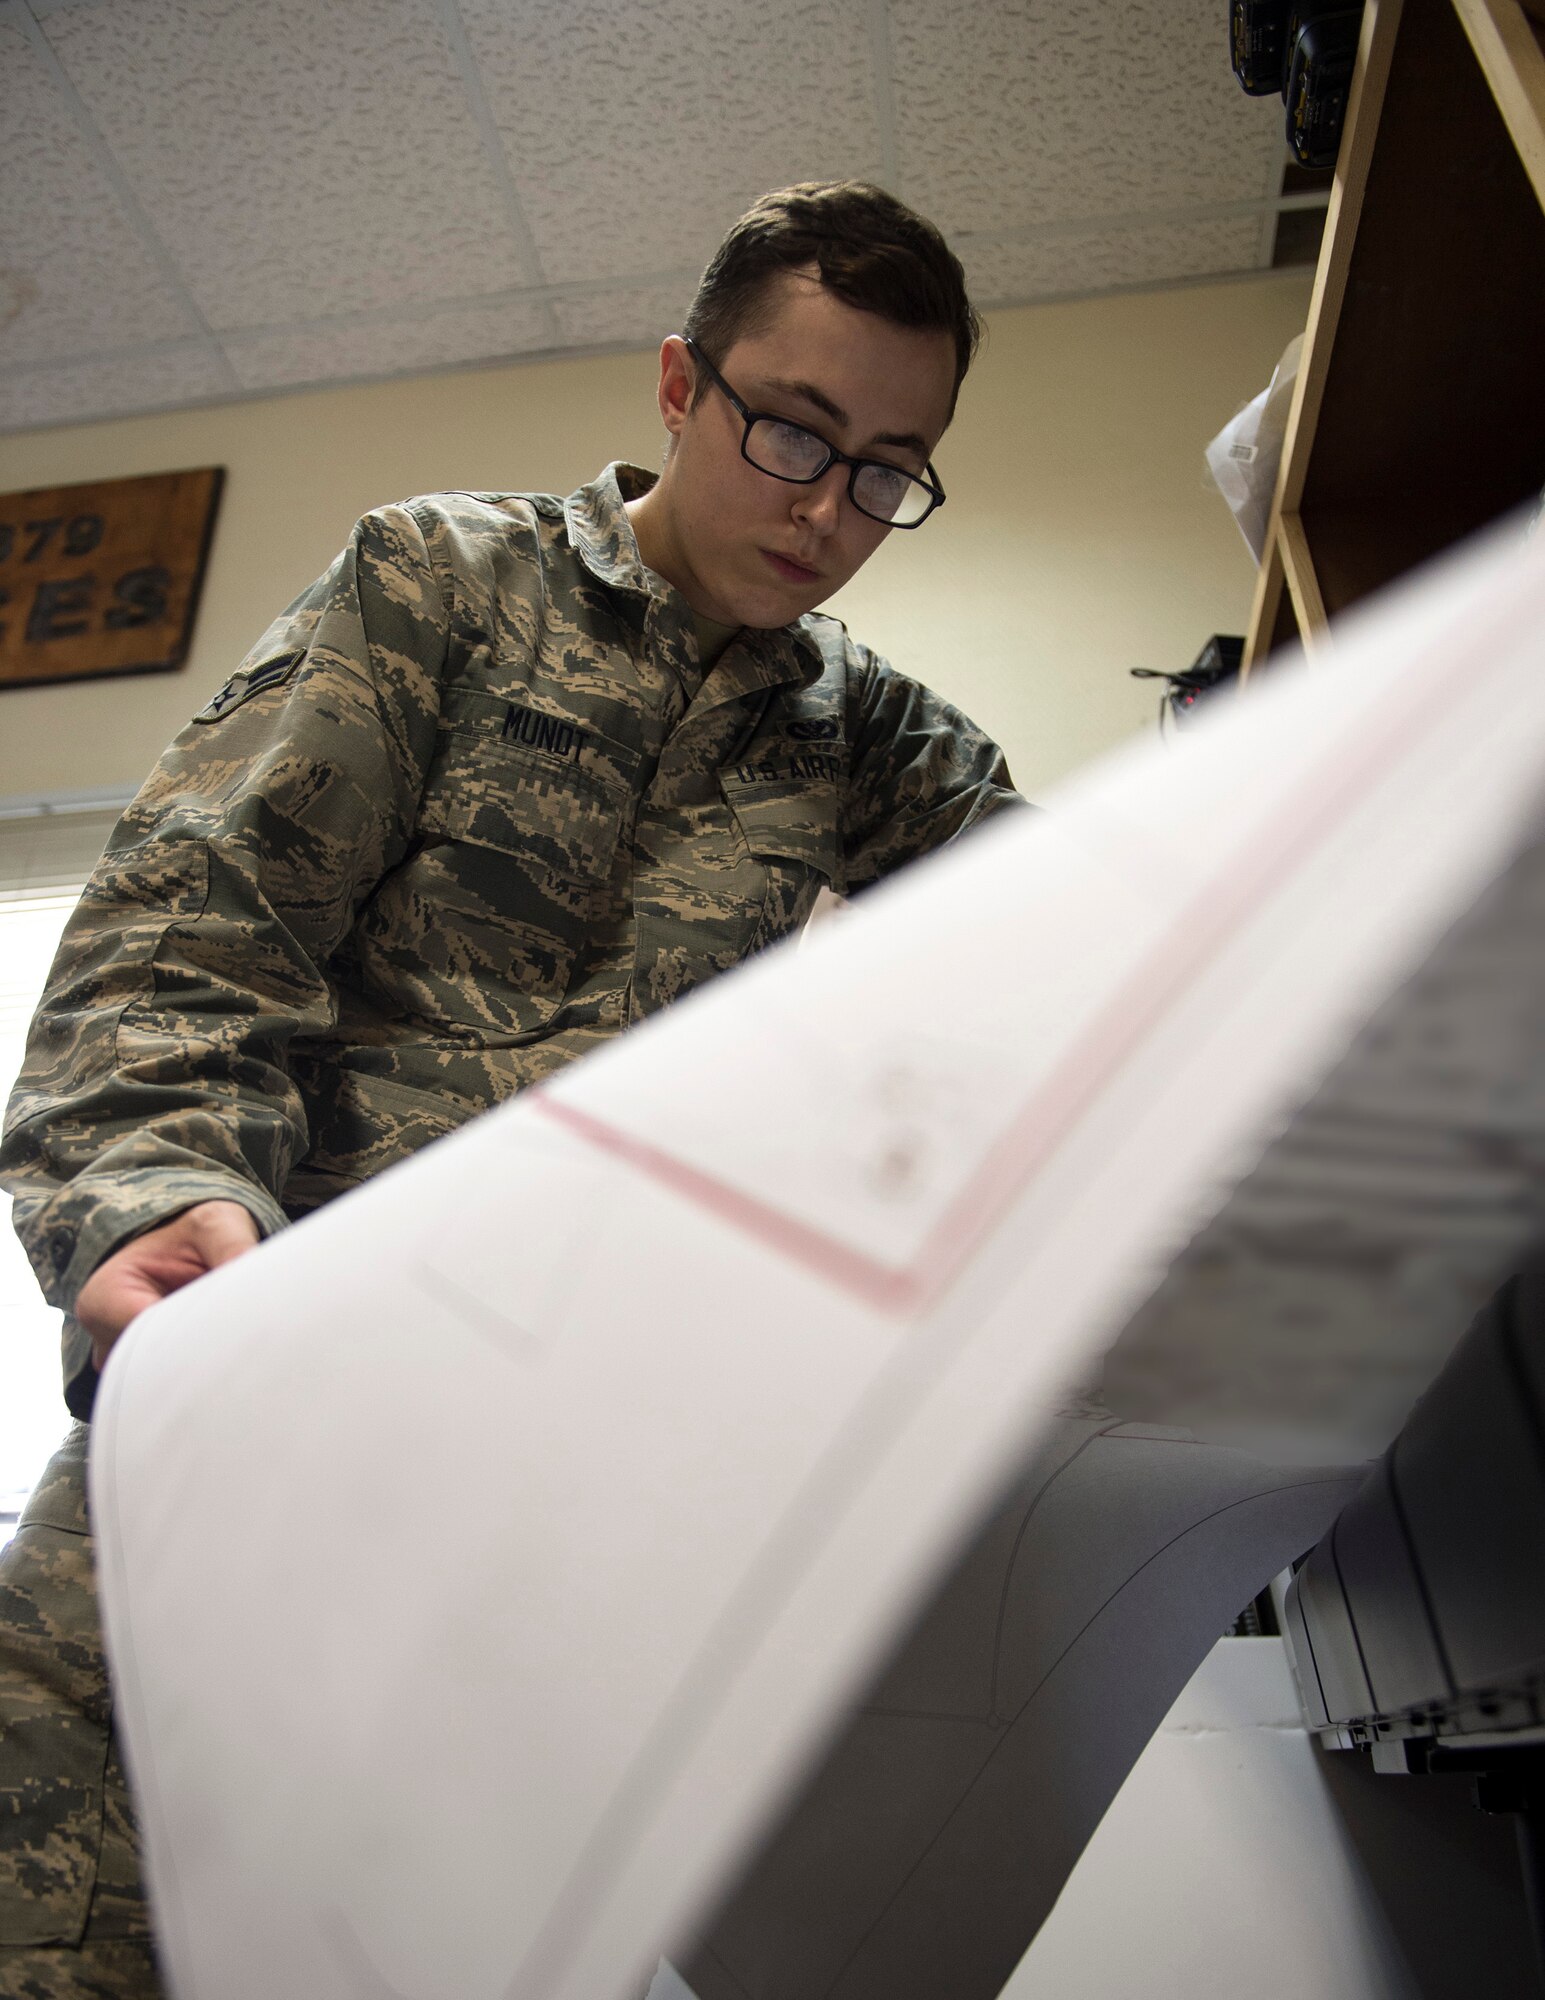 U.S Air Force Airman 1st Class Ryan Mudt, an engineering technician with the 379th Expeditionary Civil Engineer Squadron, reviews the quality of print at Al Udeid Air Base, Qatar, July 25, 2017.